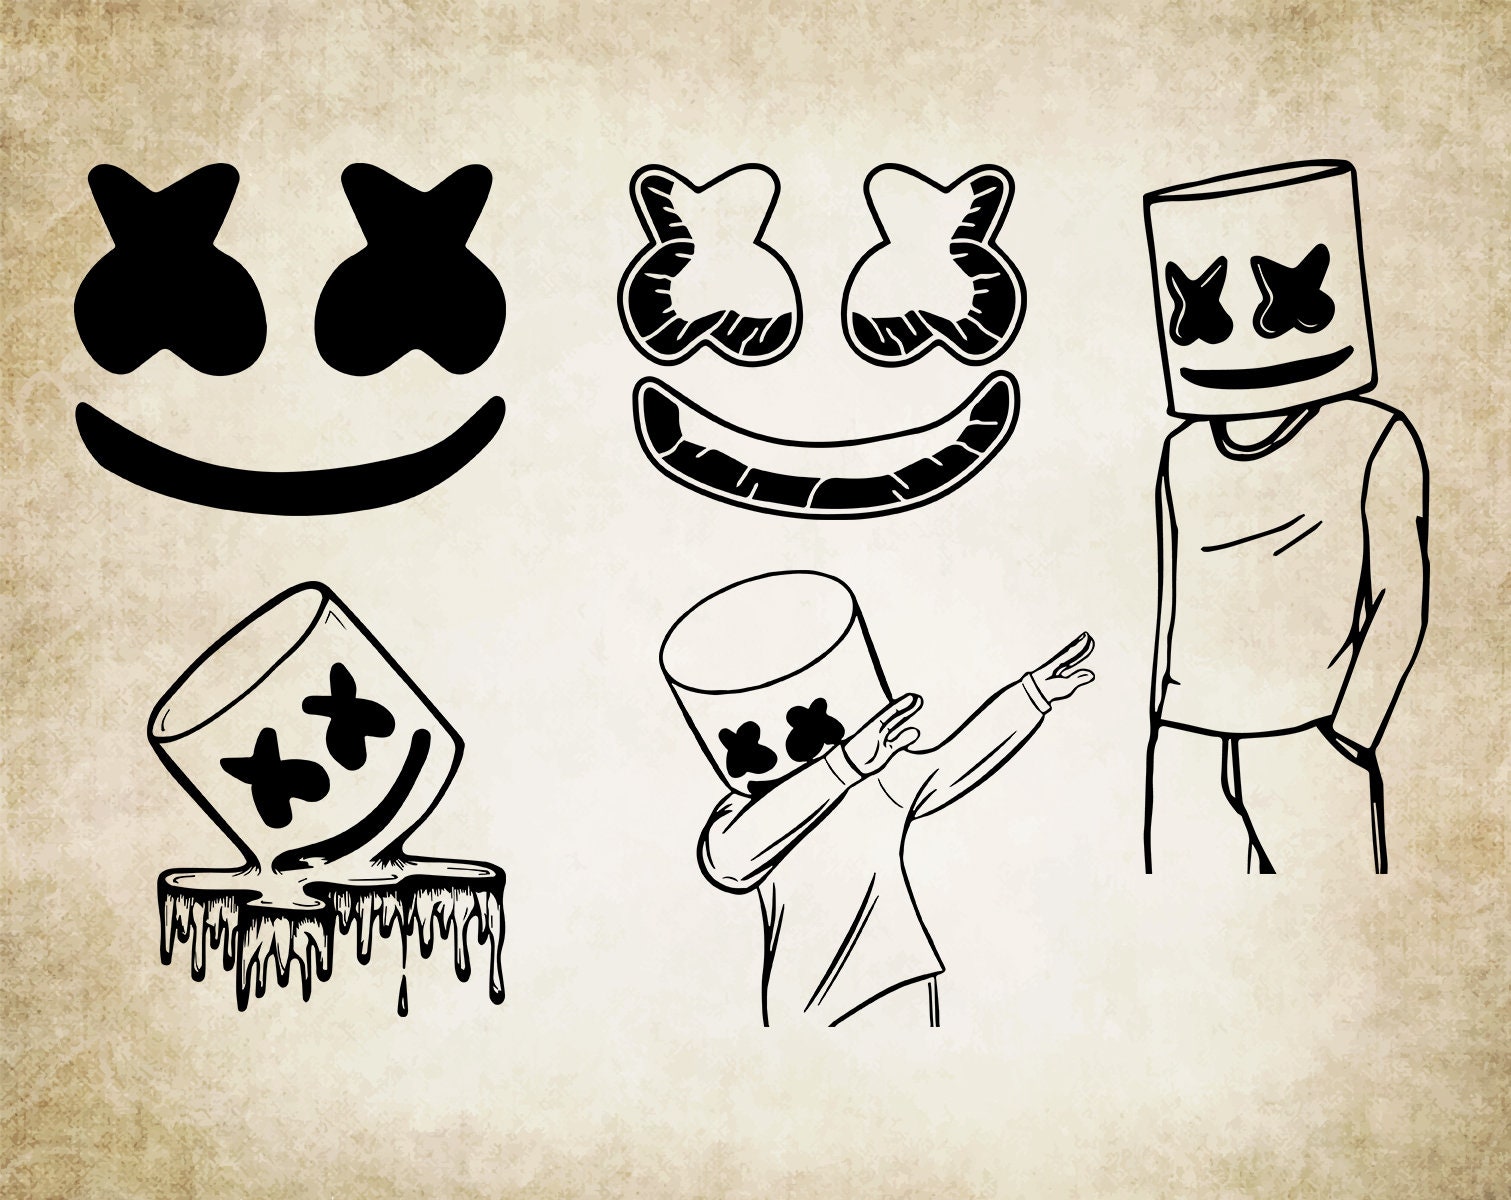 How To Draw Marshmello @ Howtodraw.pics